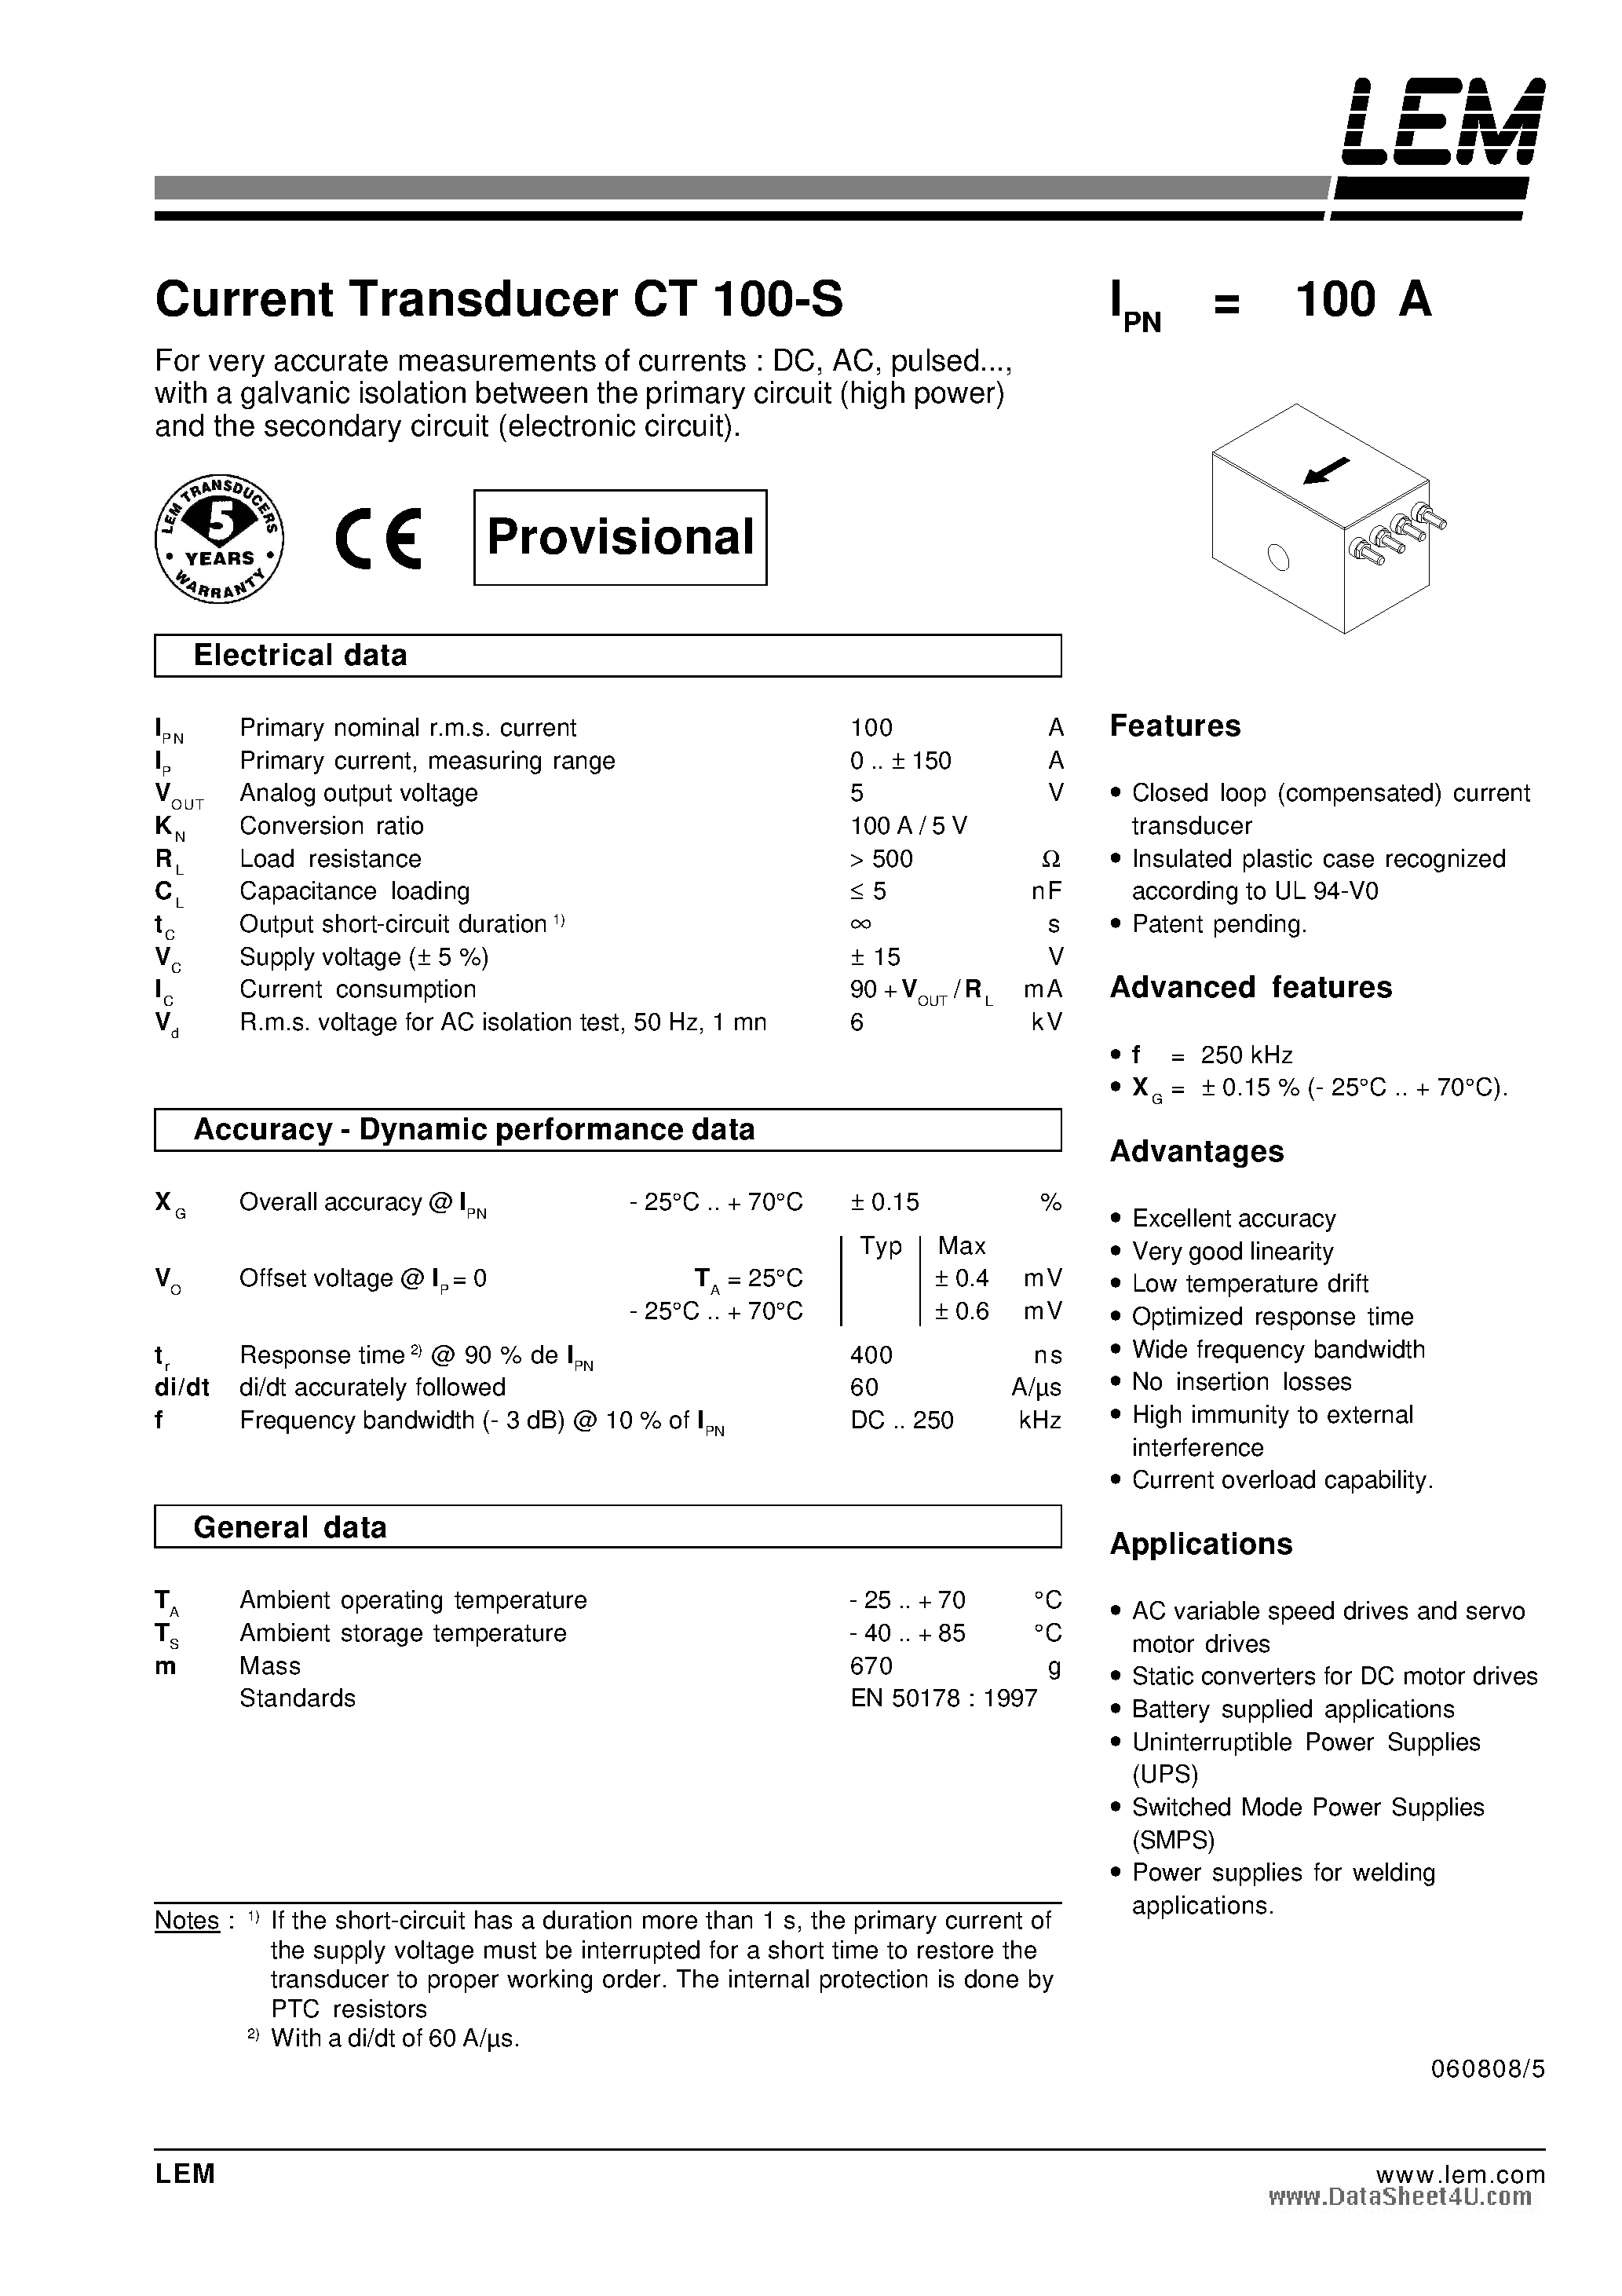 Datasheet CT100-S - Current Transducers CT 100-S page 1